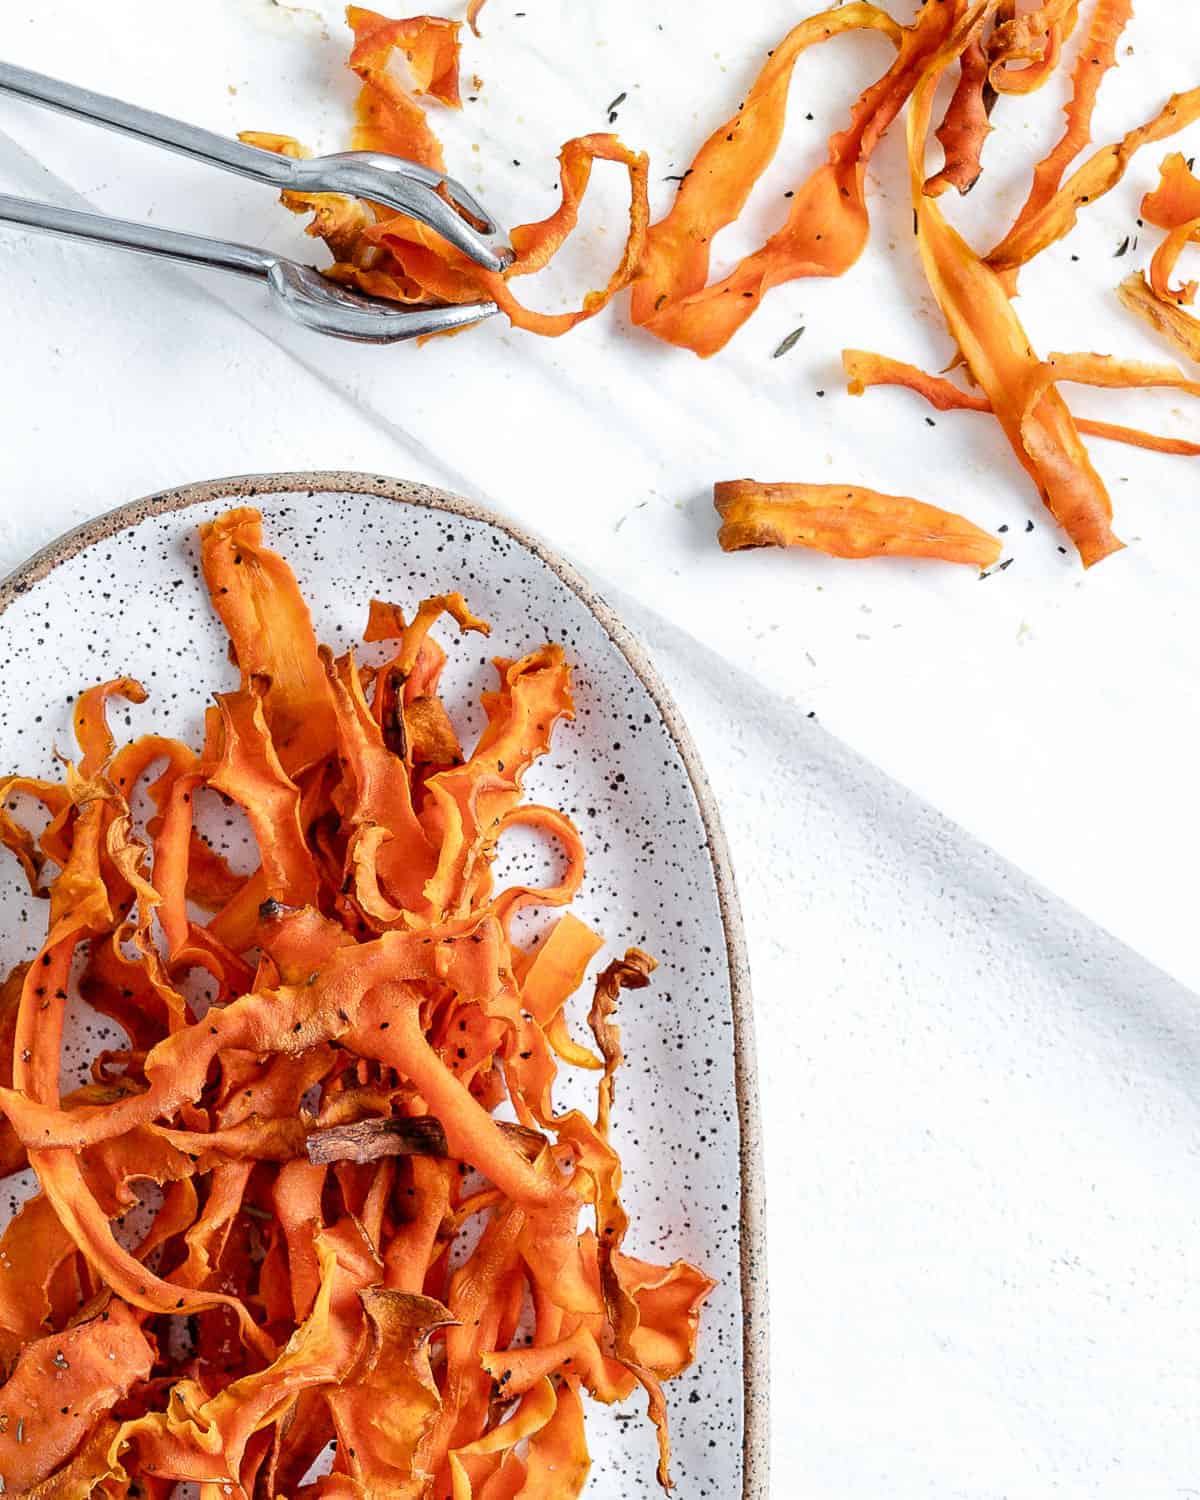 completed carrot fries in a white platter against a white background with carrot fries scattered in the background